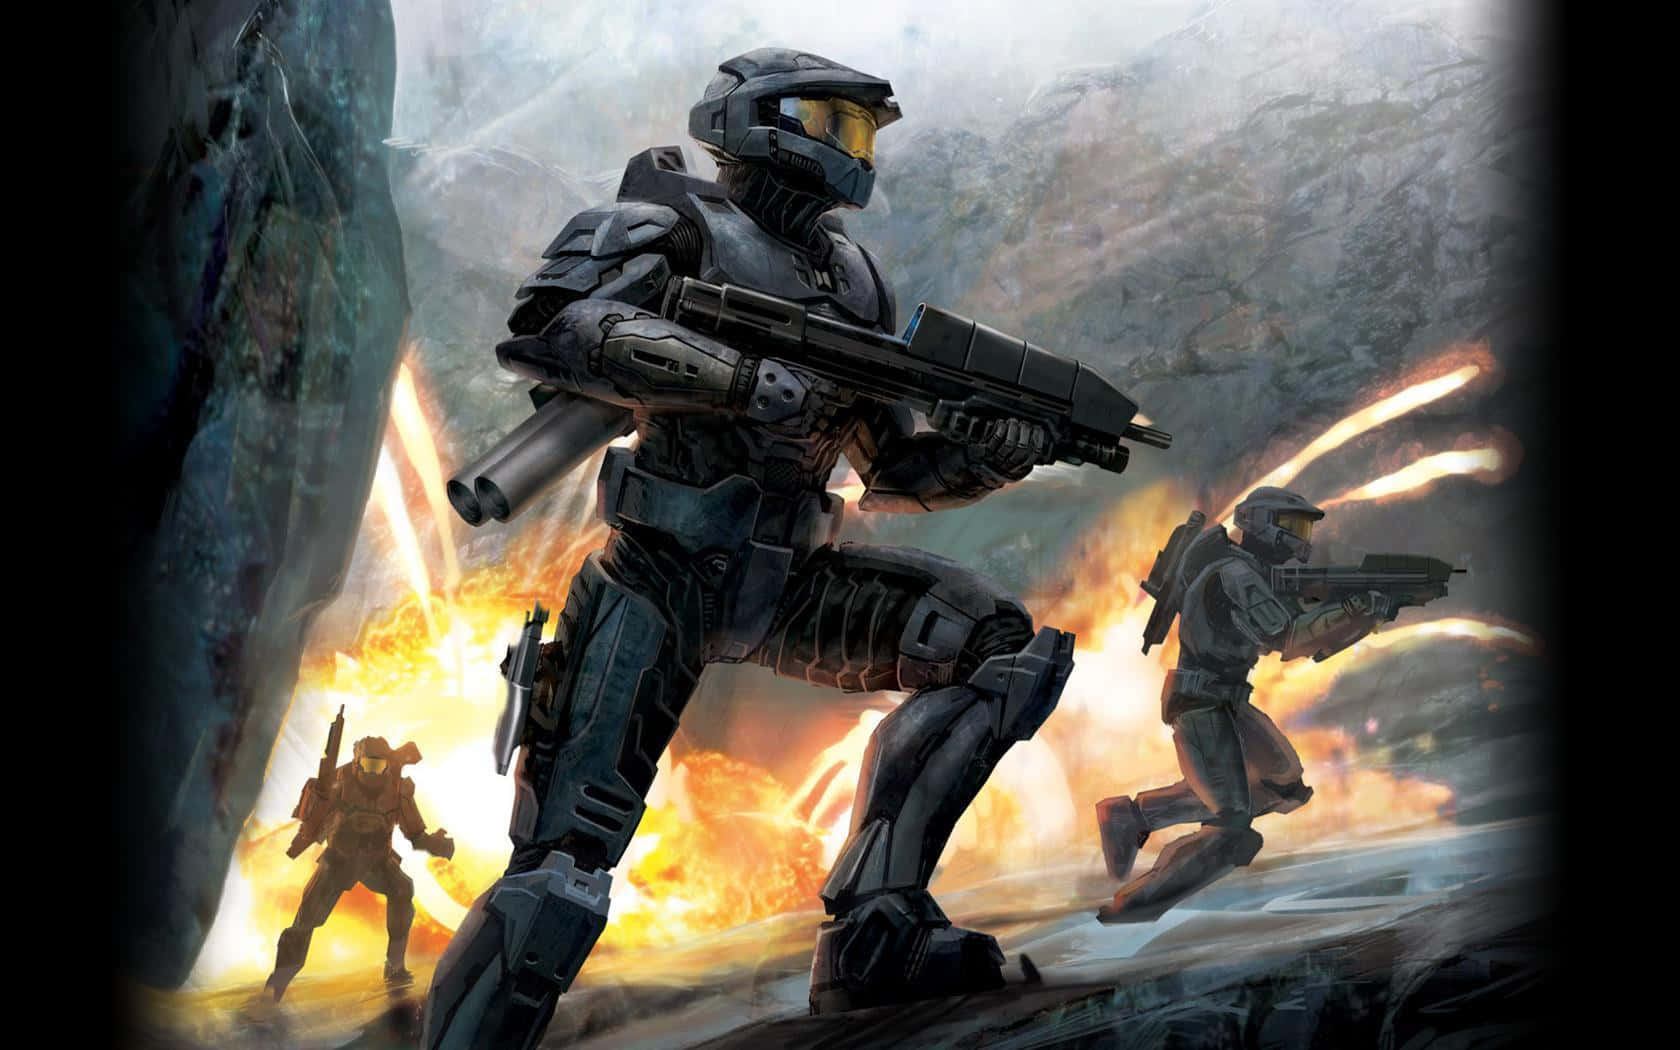 Spartan soldiers with advanced weaponry in the Halo universe Wallpaper